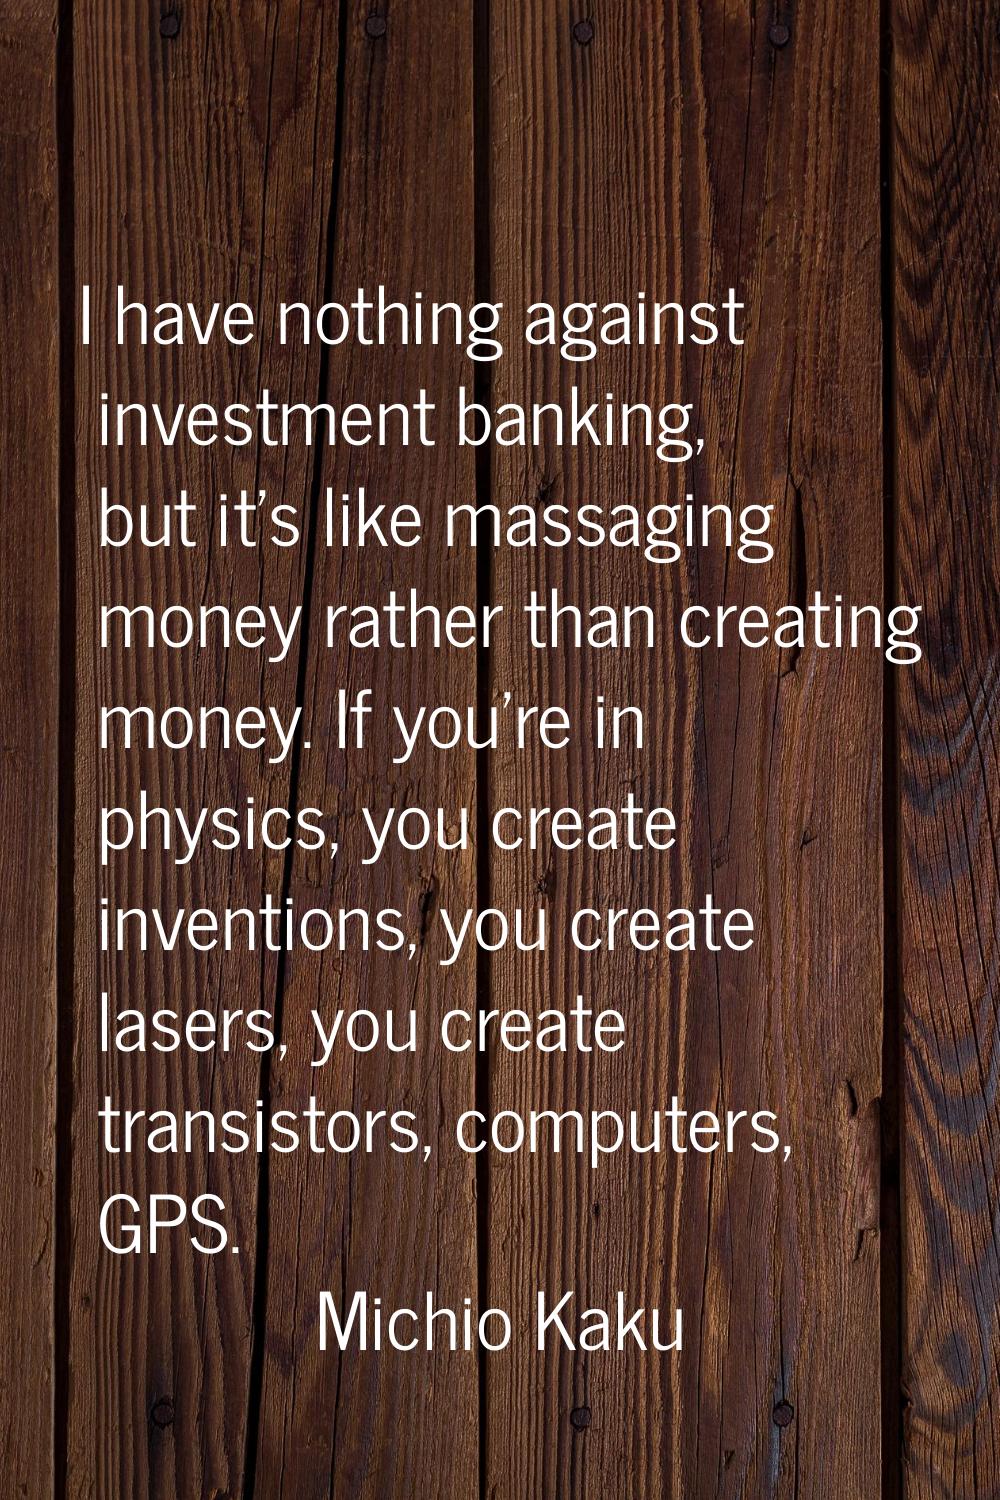 I have nothing against investment banking, but it's like massaging money rather than creating money